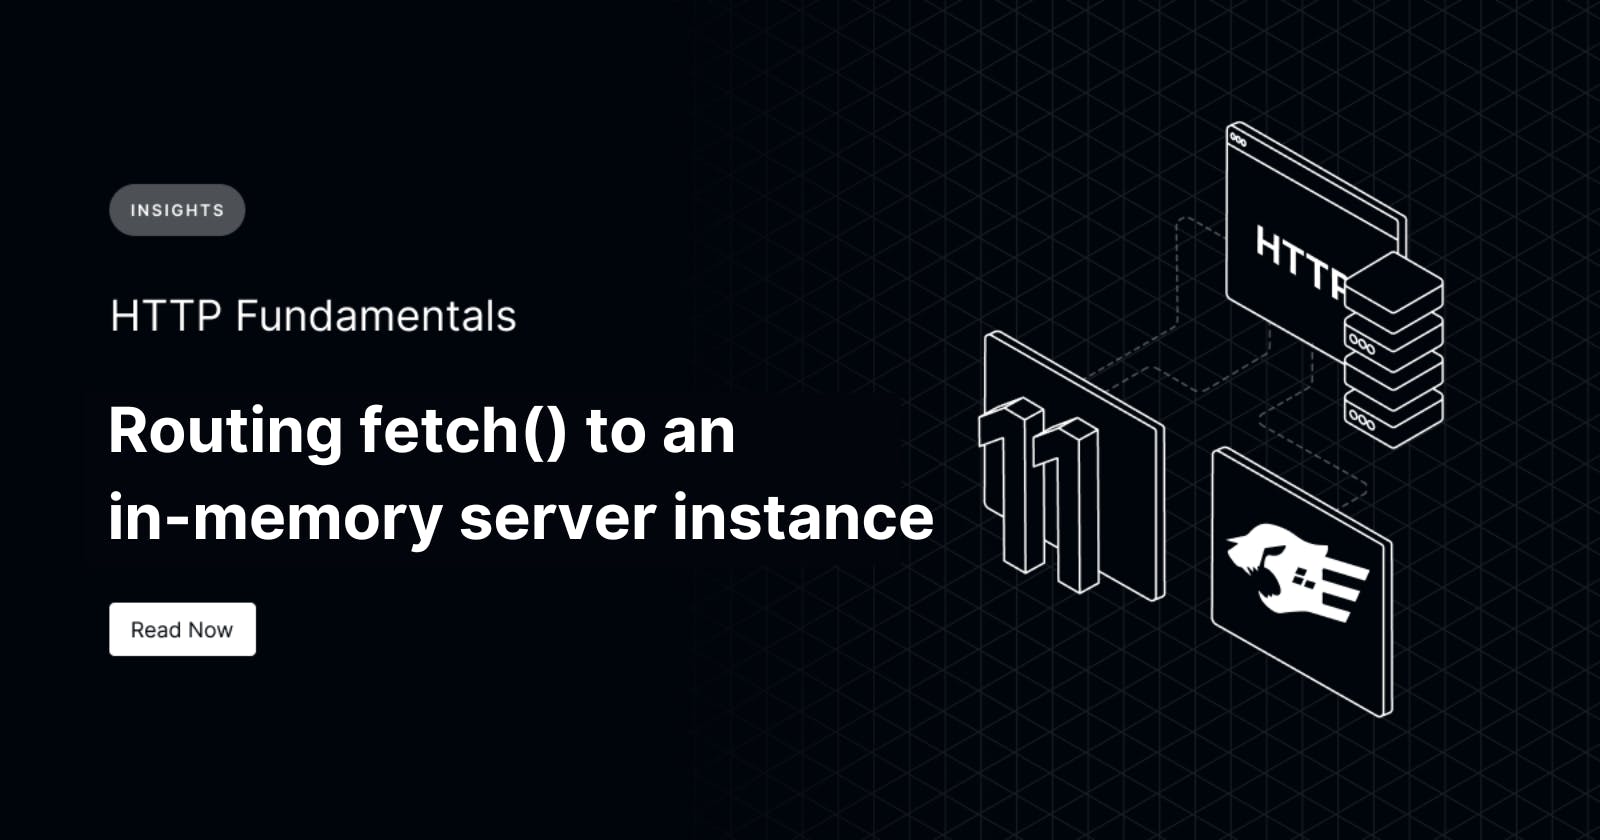 HTTP Fundamentals: Routing fetch() to an in-memory server instance